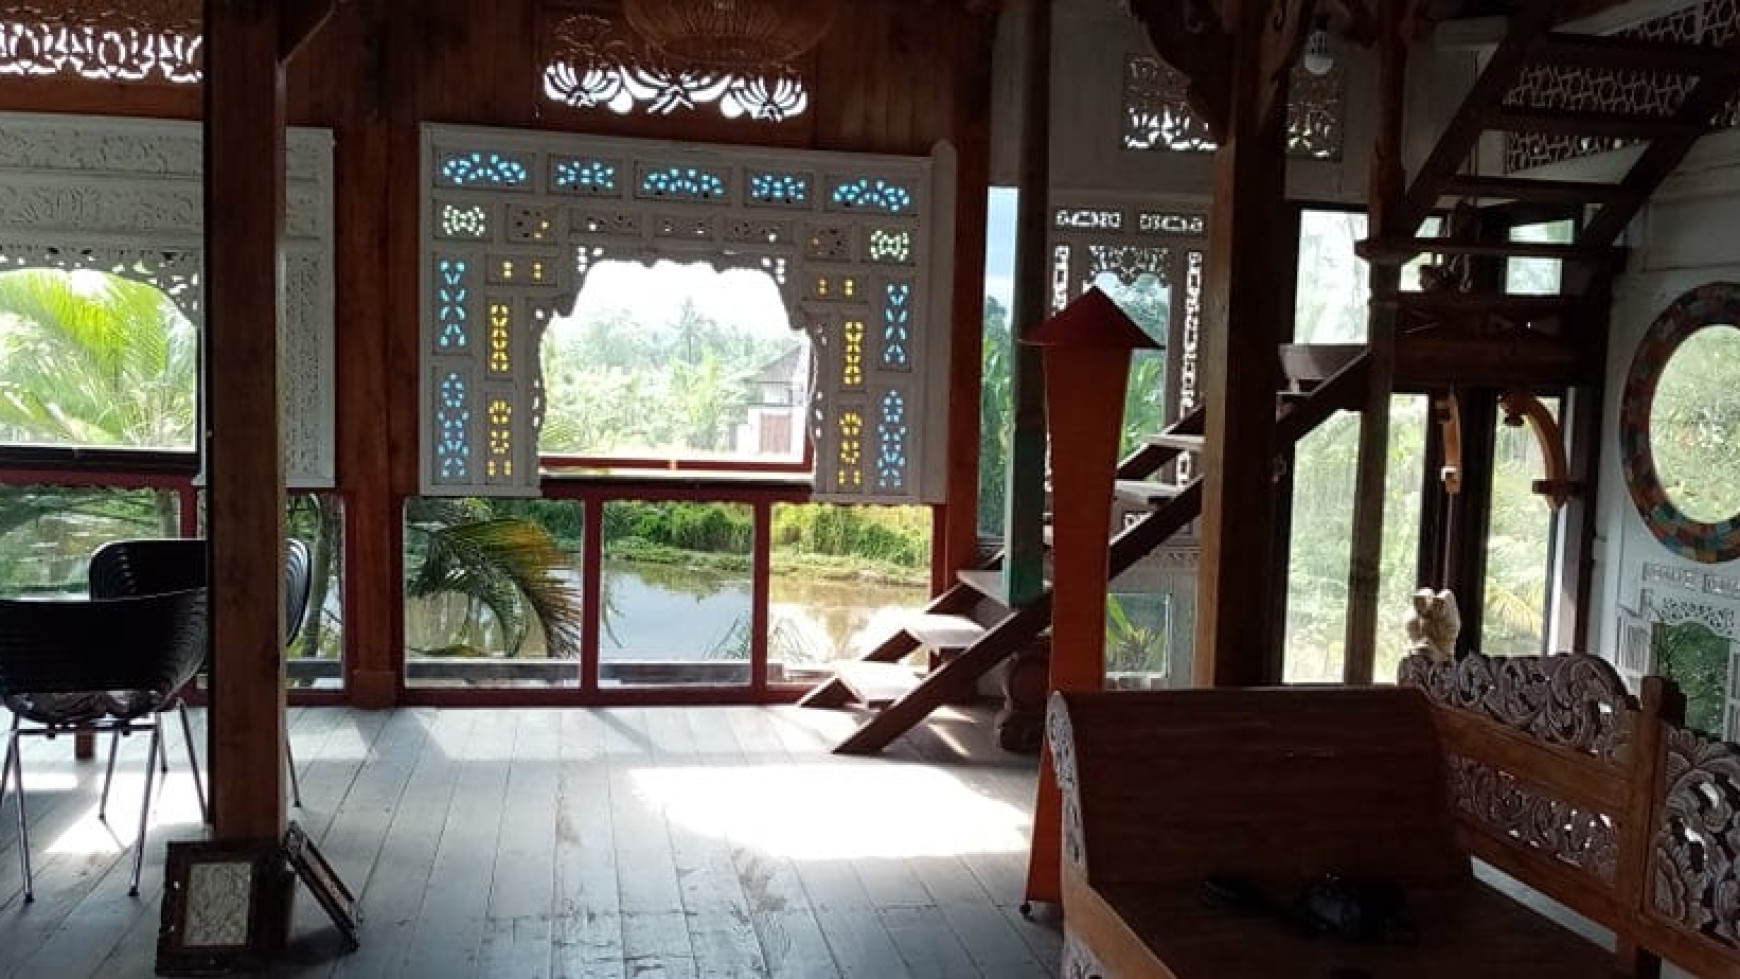 2 Bedroom Joglo Villa On 200 sqm of Leasehold Land with Amazing View For Sale, Located 15 Minutes From Ubud Center